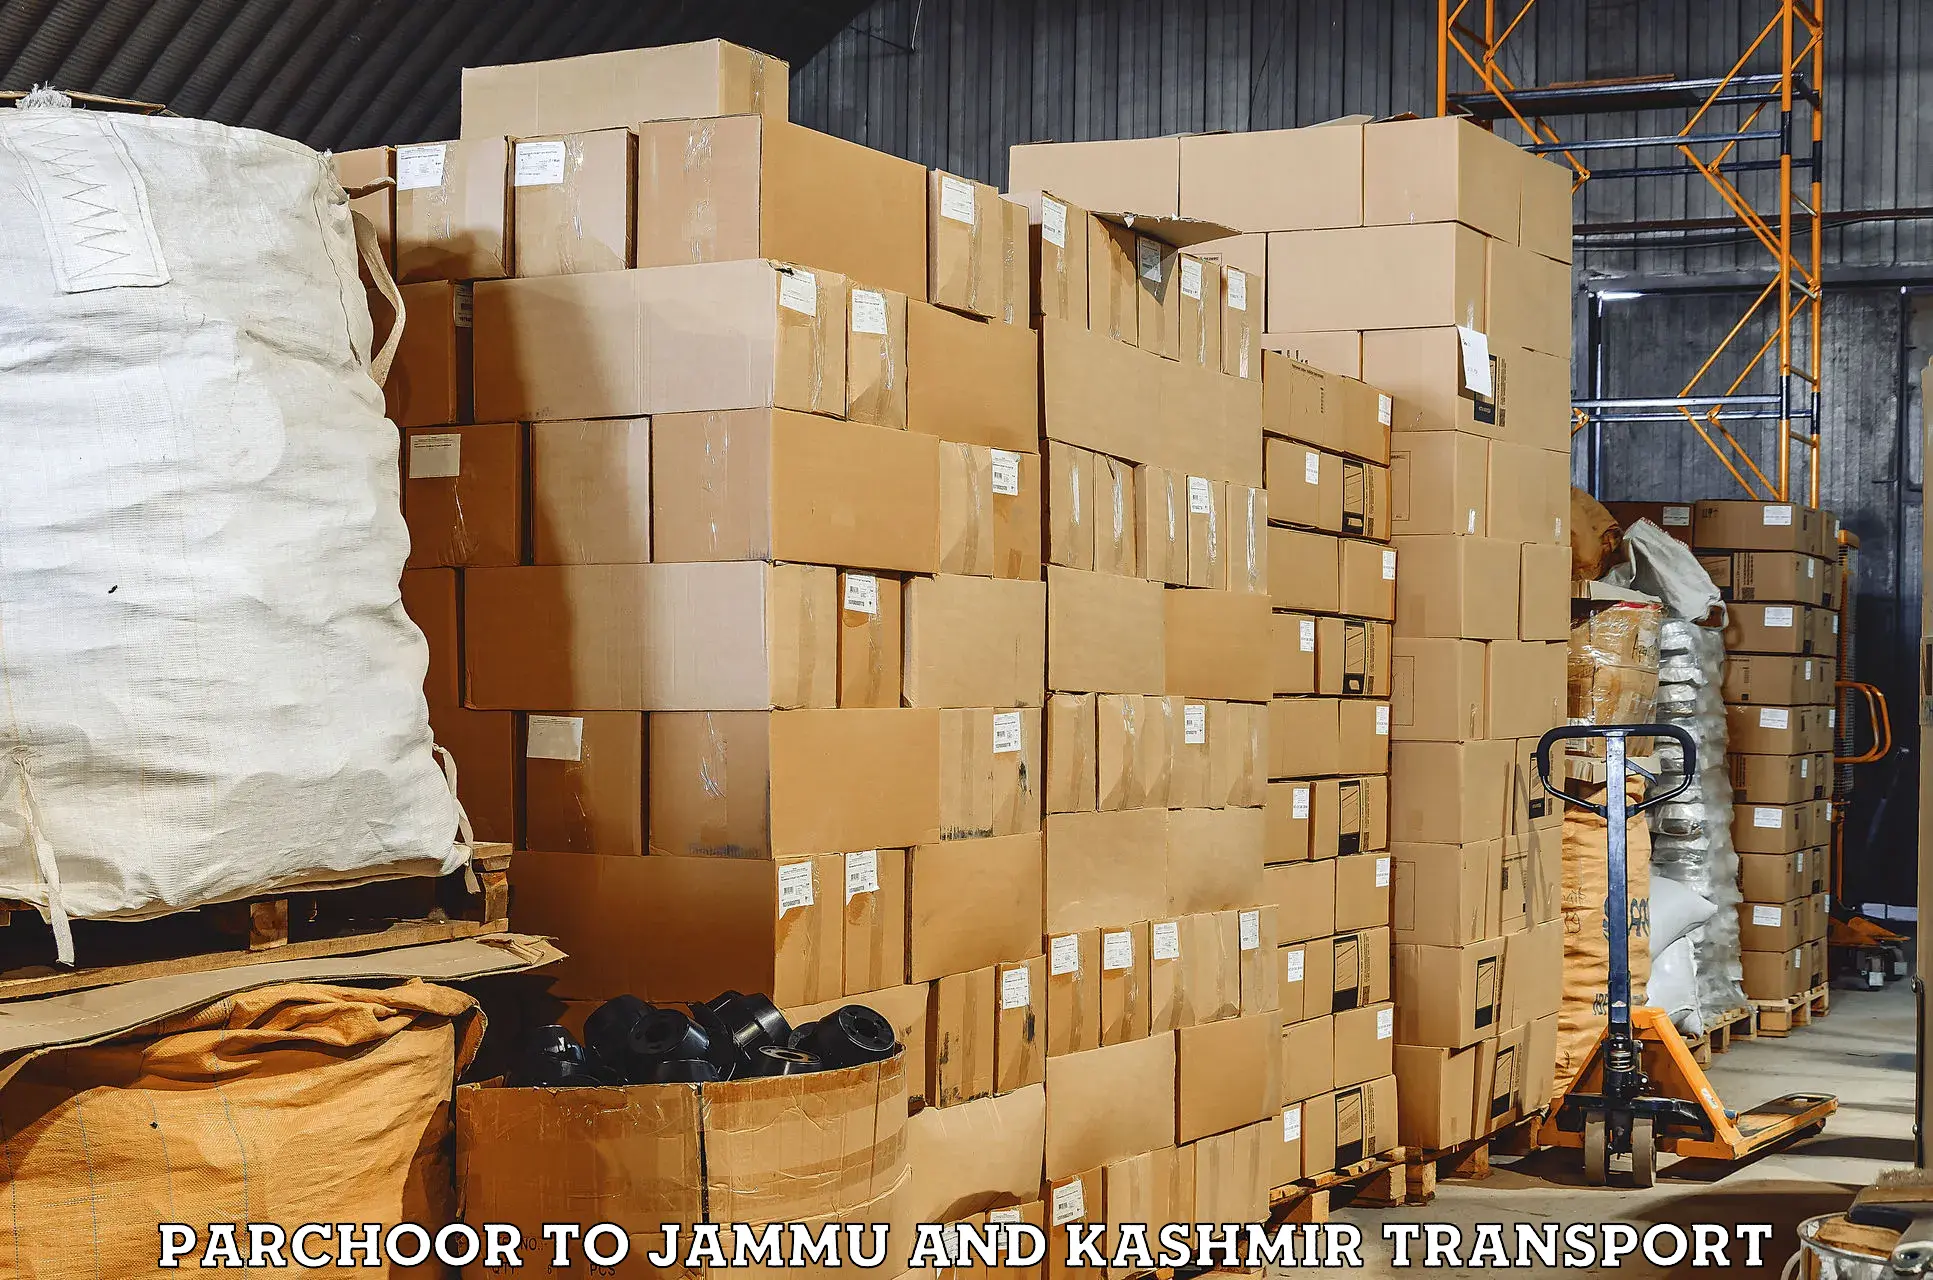 Shipping partner Parchoor to Jammu and Kashmir